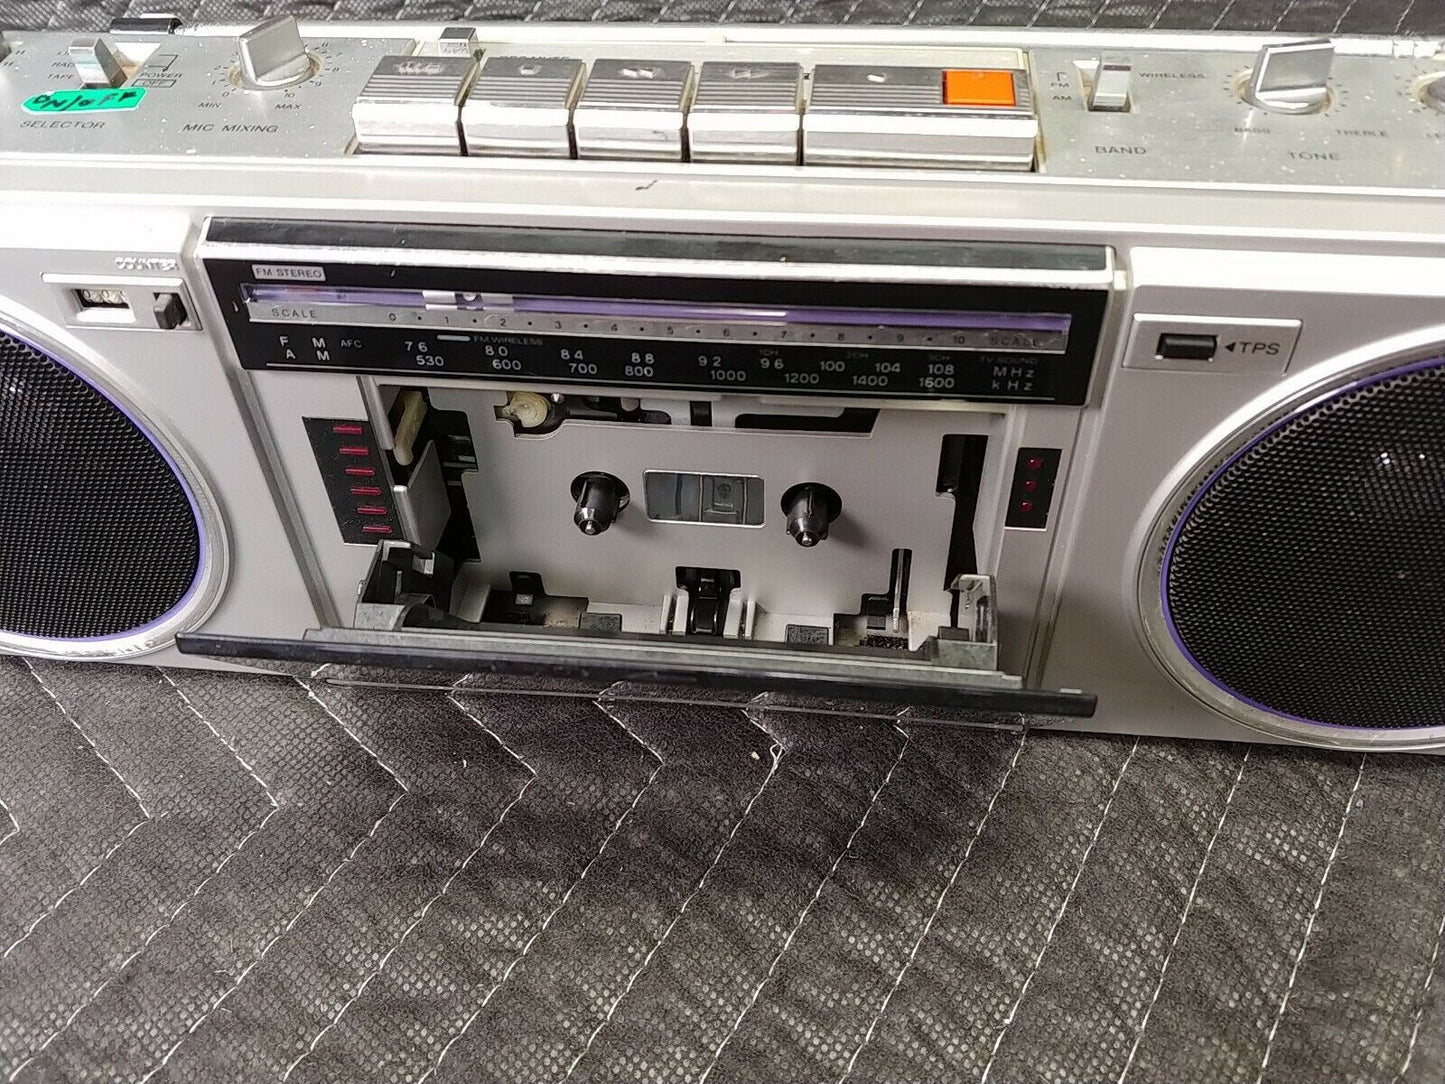 National RX-F20 Stereo BOOMBOX Japan FM/AM Radio Cassette